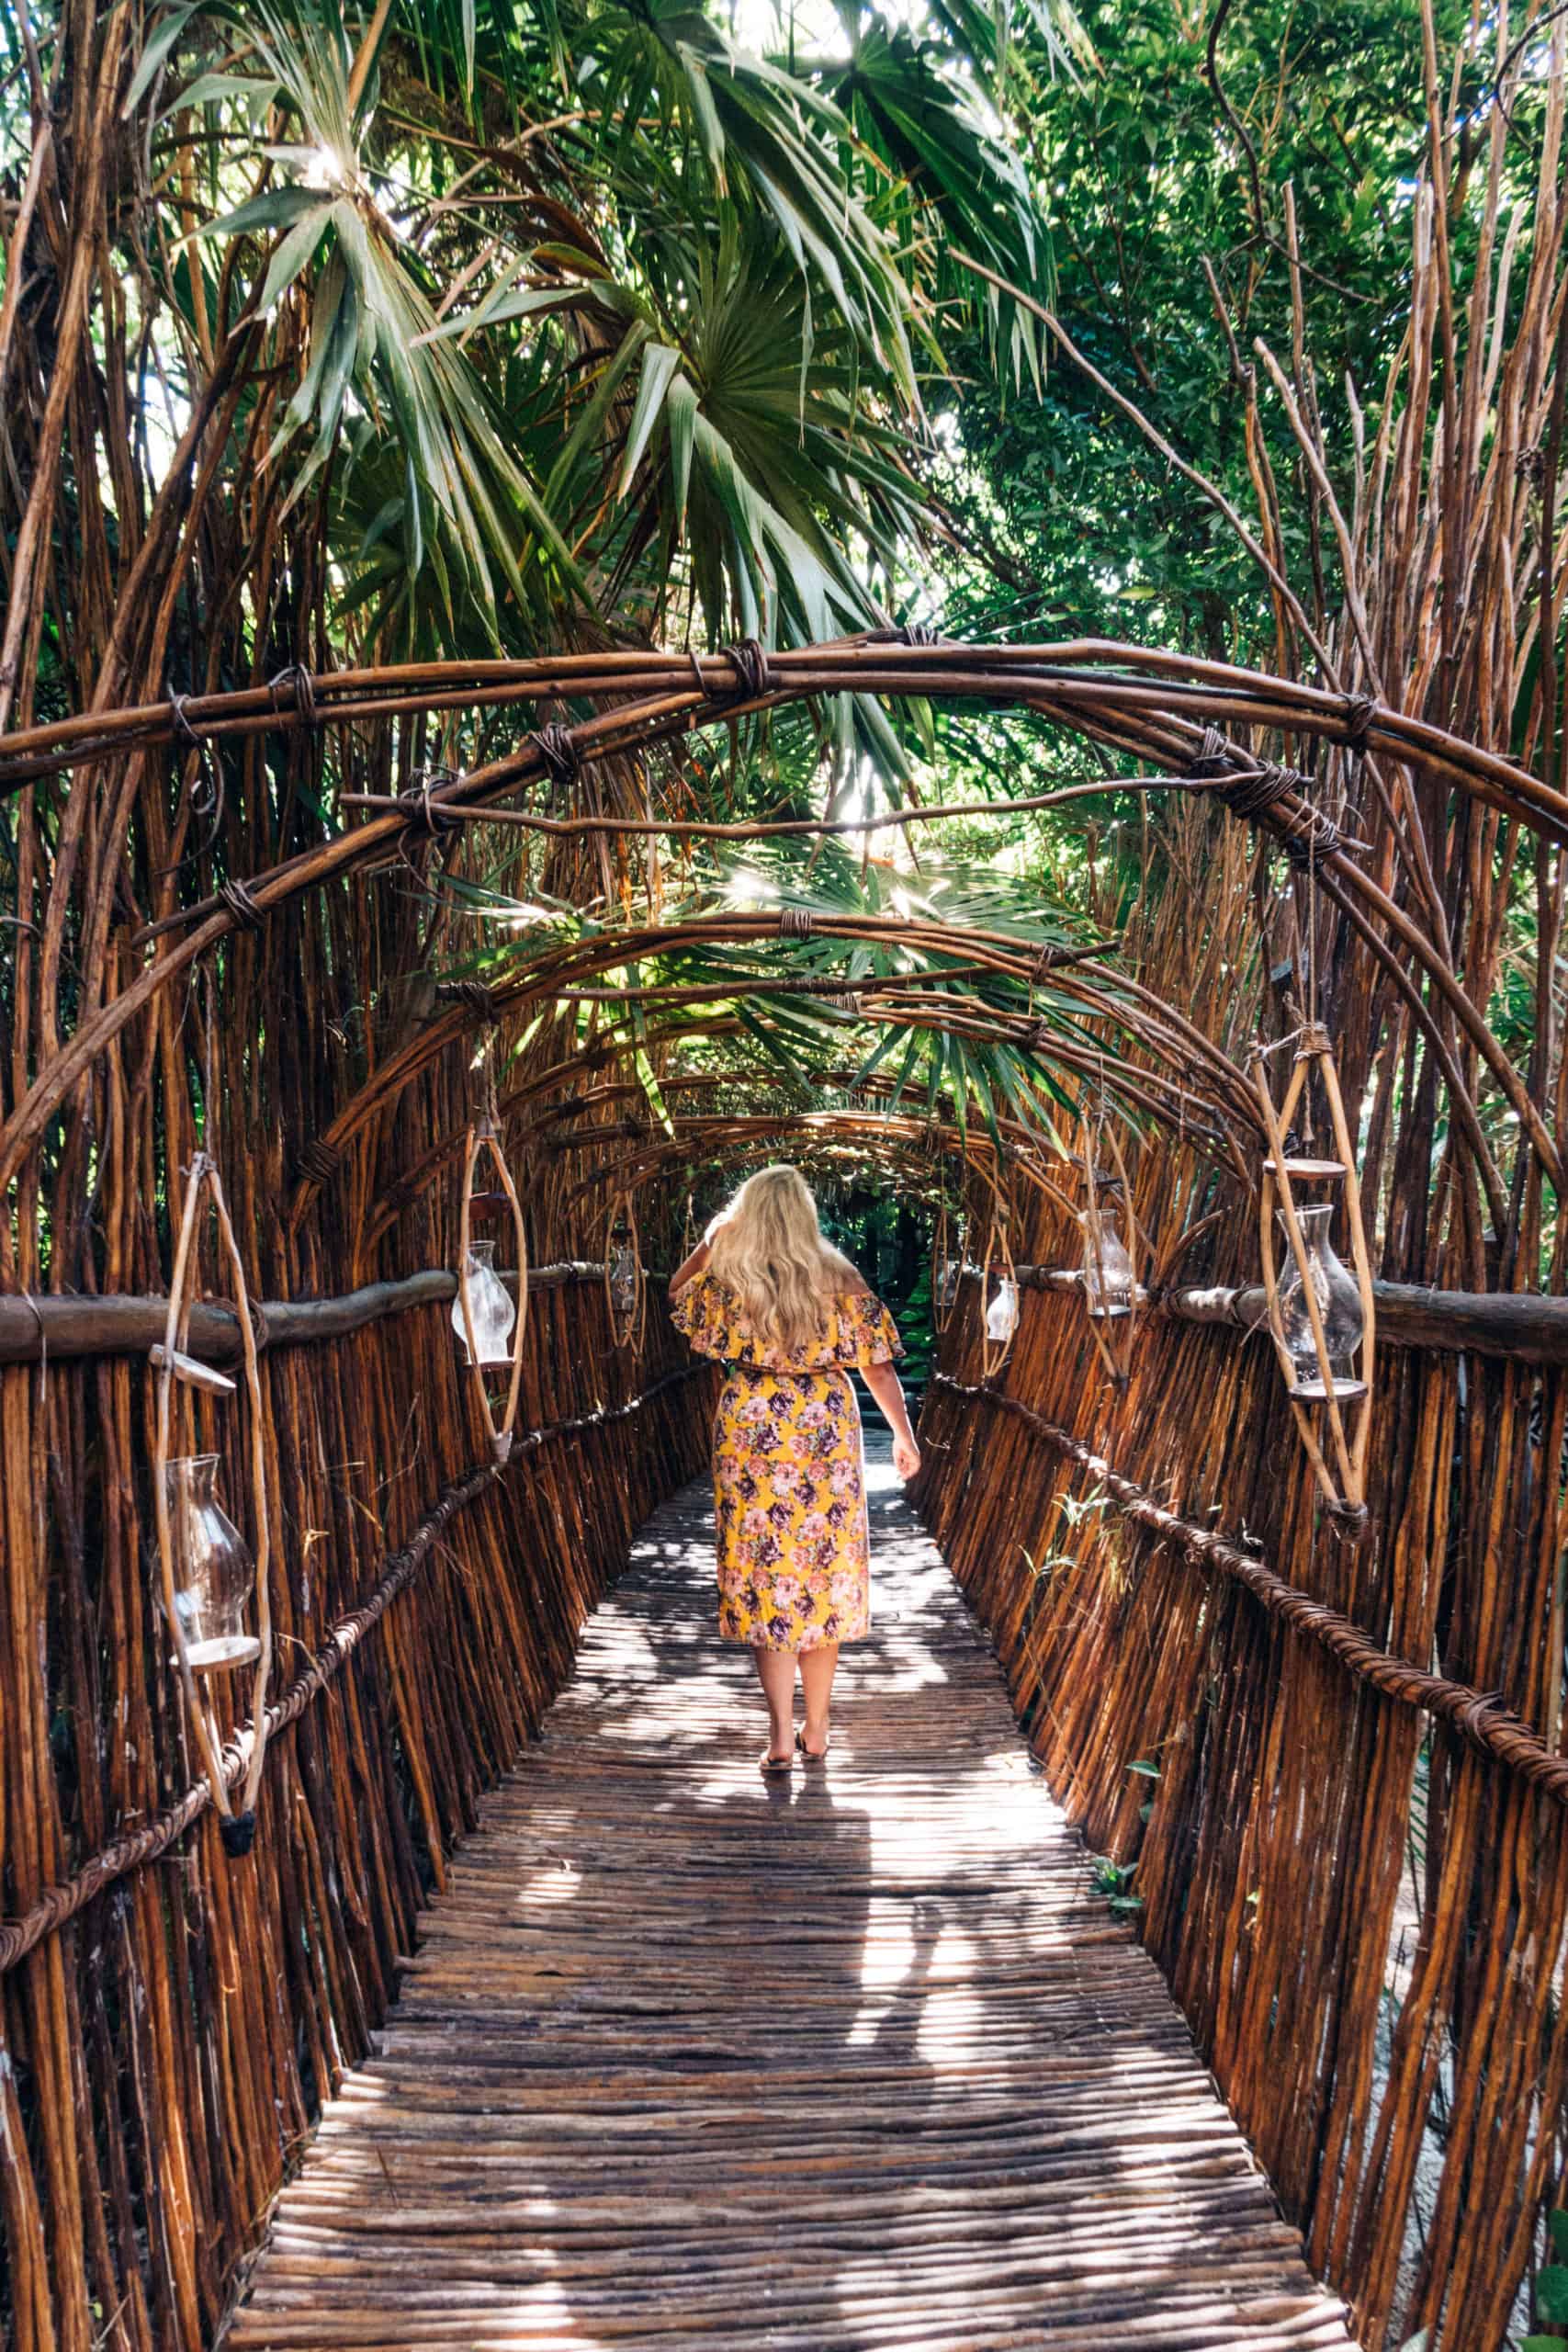 Entry way to Azulik hotel in Tulum, Mexico